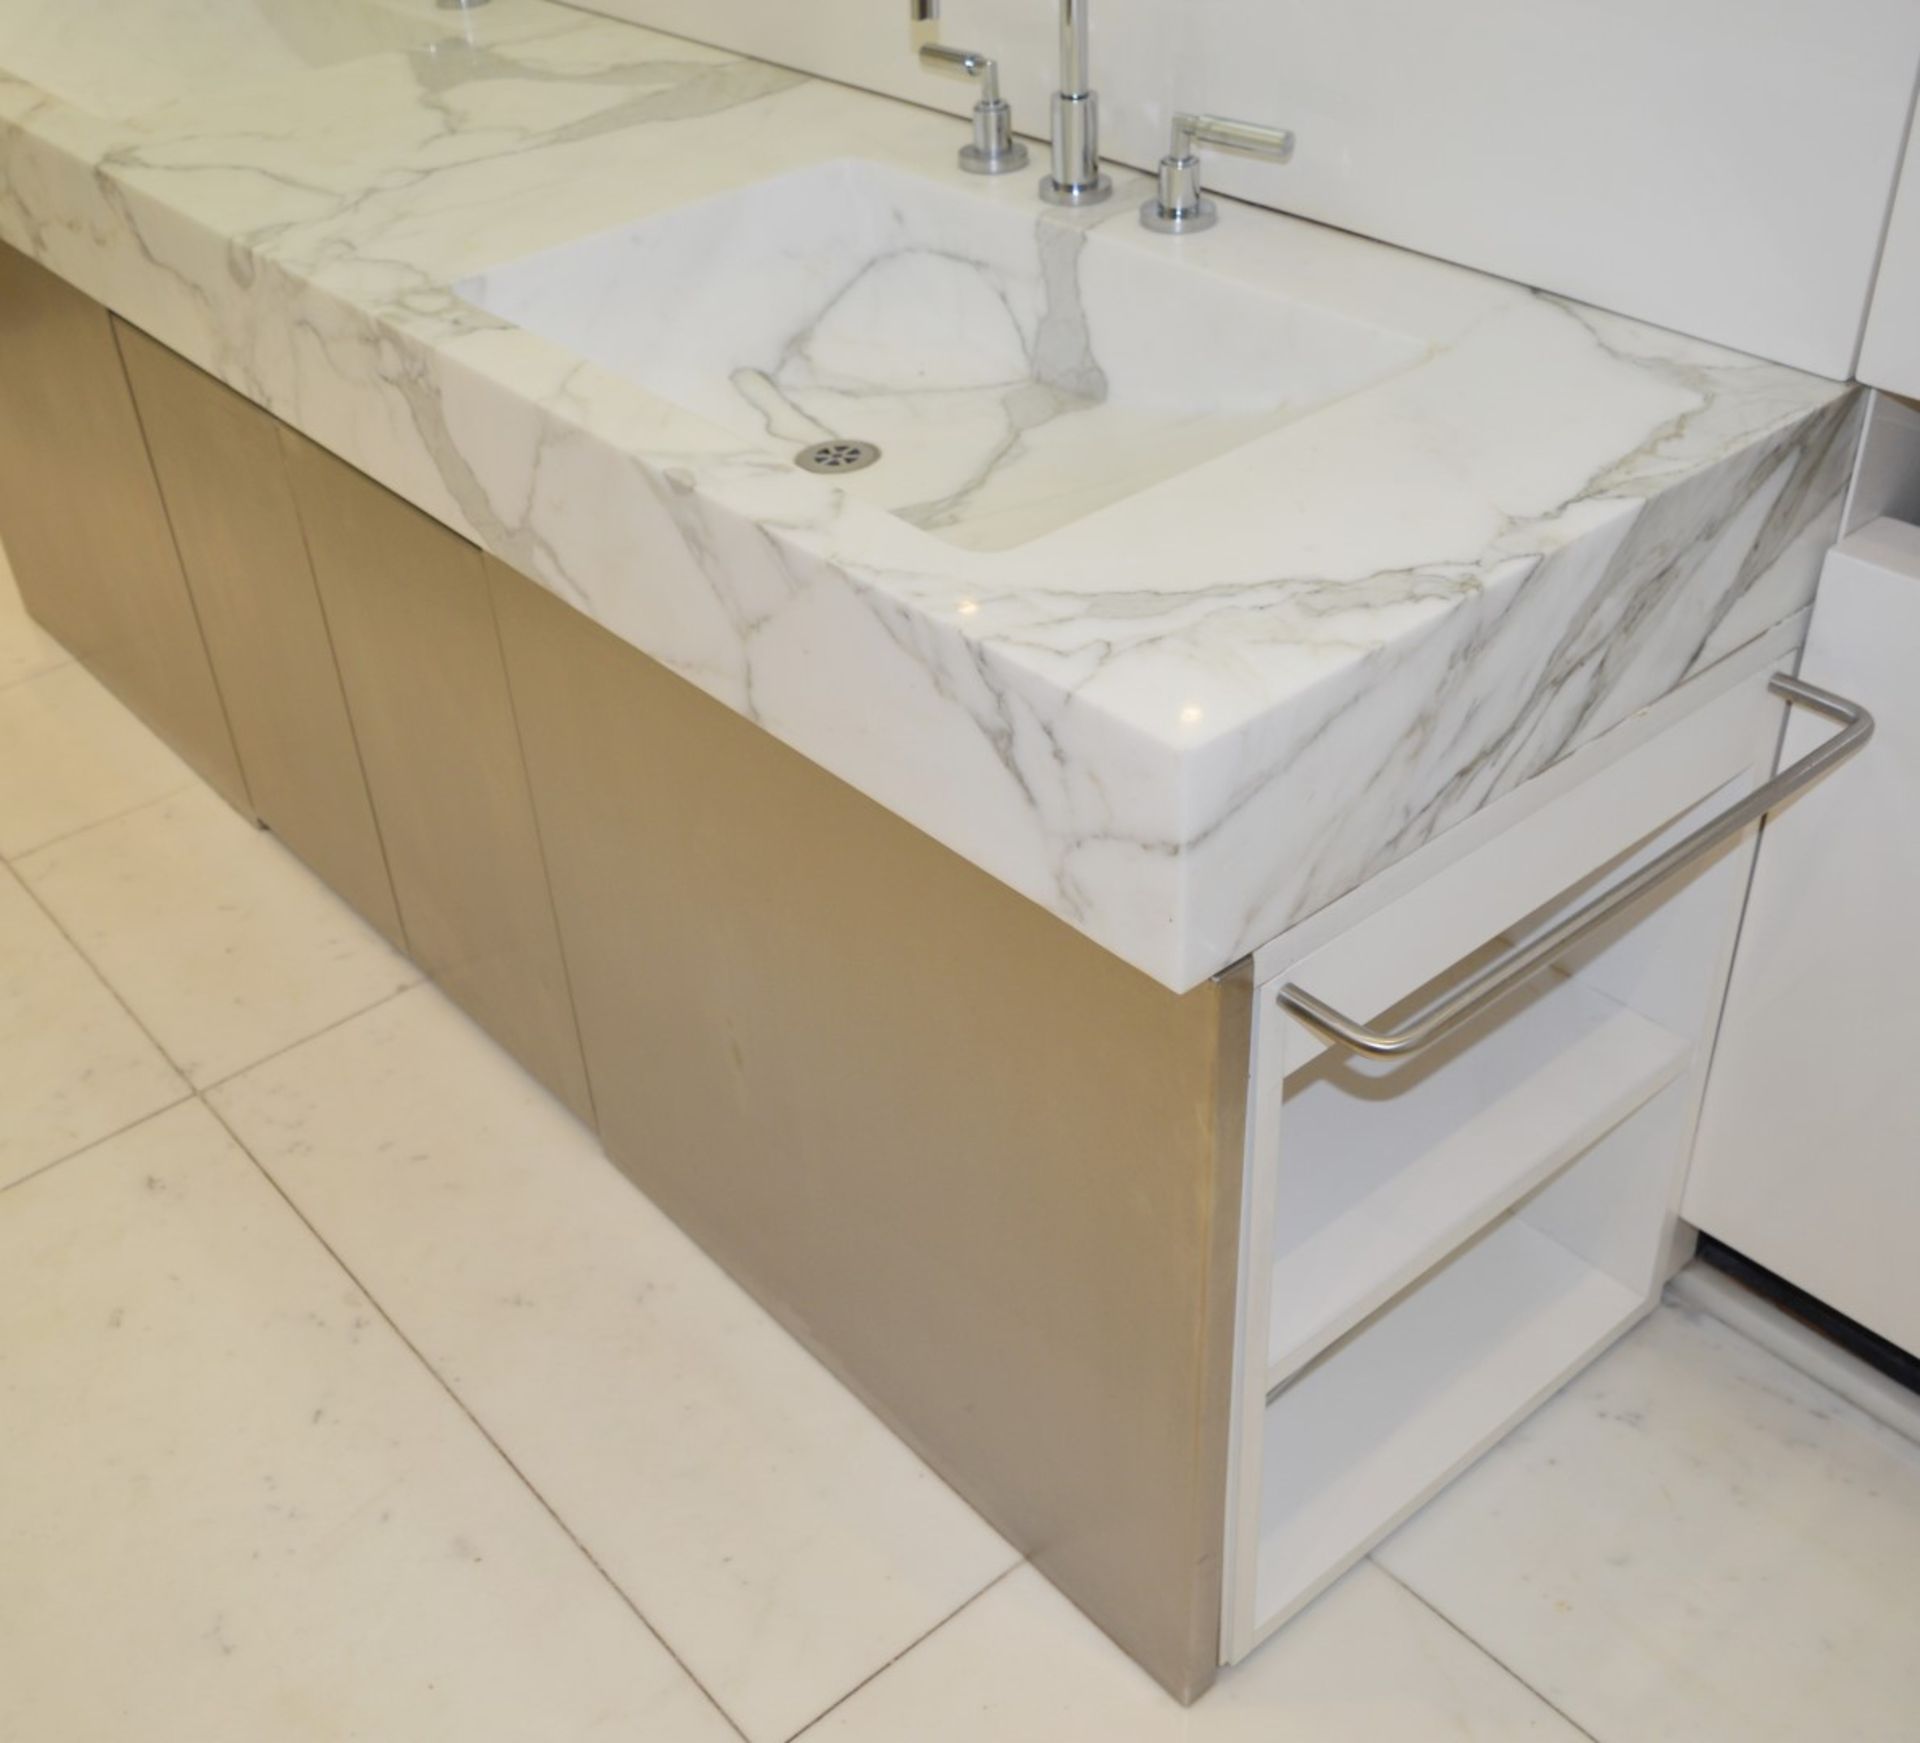 1 x Bespoke His & Hers Marble Bathroom Vanity Unit - Exquisite 7ft Twin Marble Sink Basin With Two - Image 2 of 25